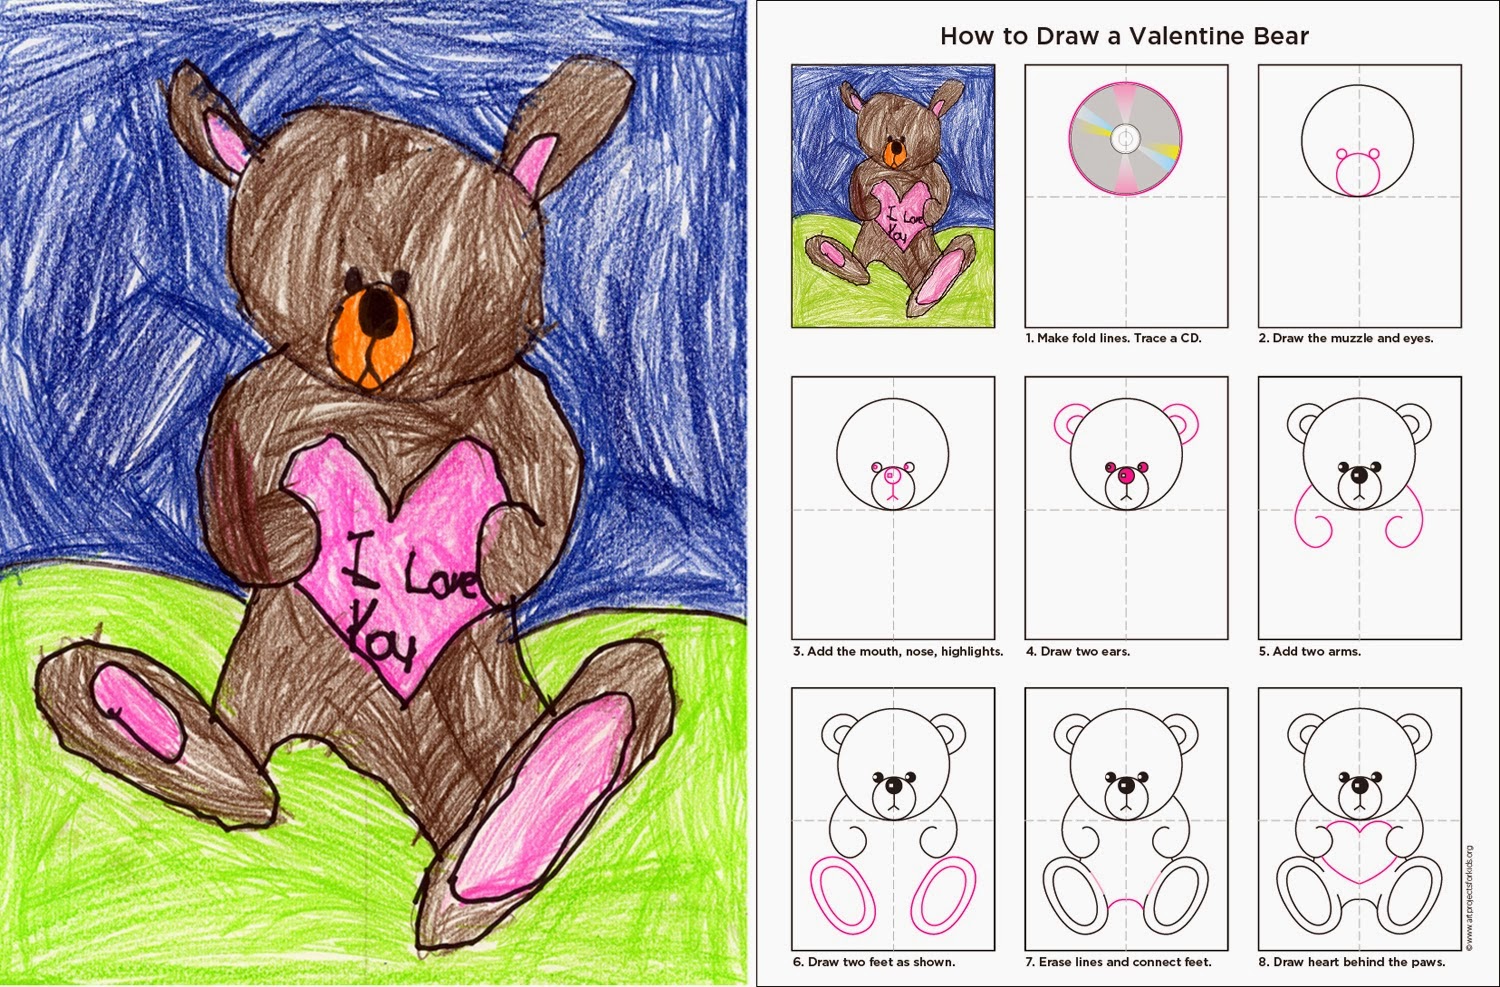 http://artprojectsforkids.me/wp-content/uploads/2014/01/How-to-Draw-a-Valentine-Bear.pdf